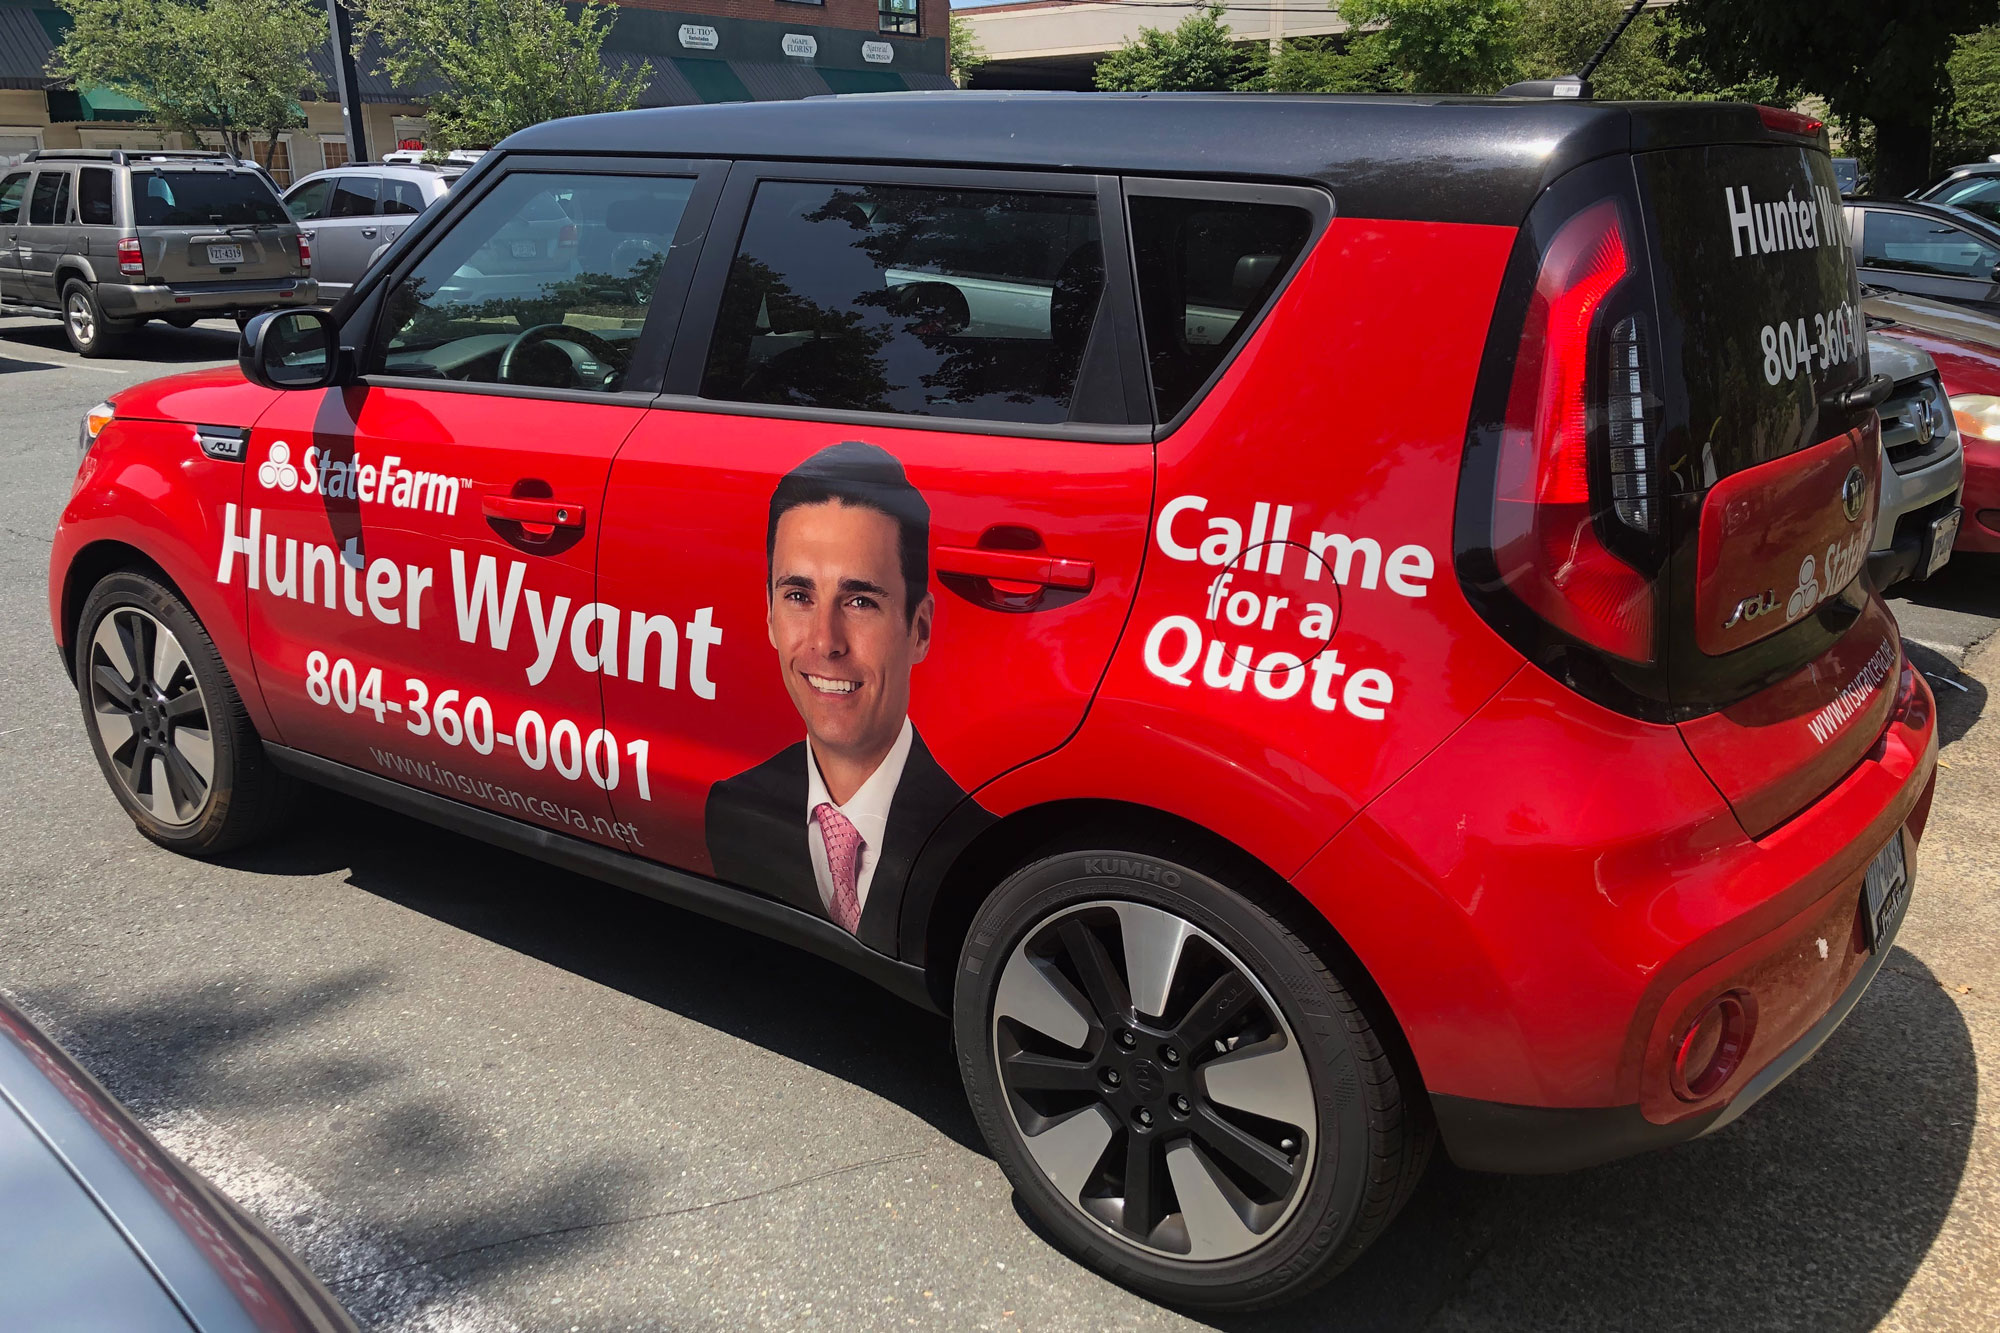 Red  and black State Farm Car with Hunter Wyants face on it and his contact information